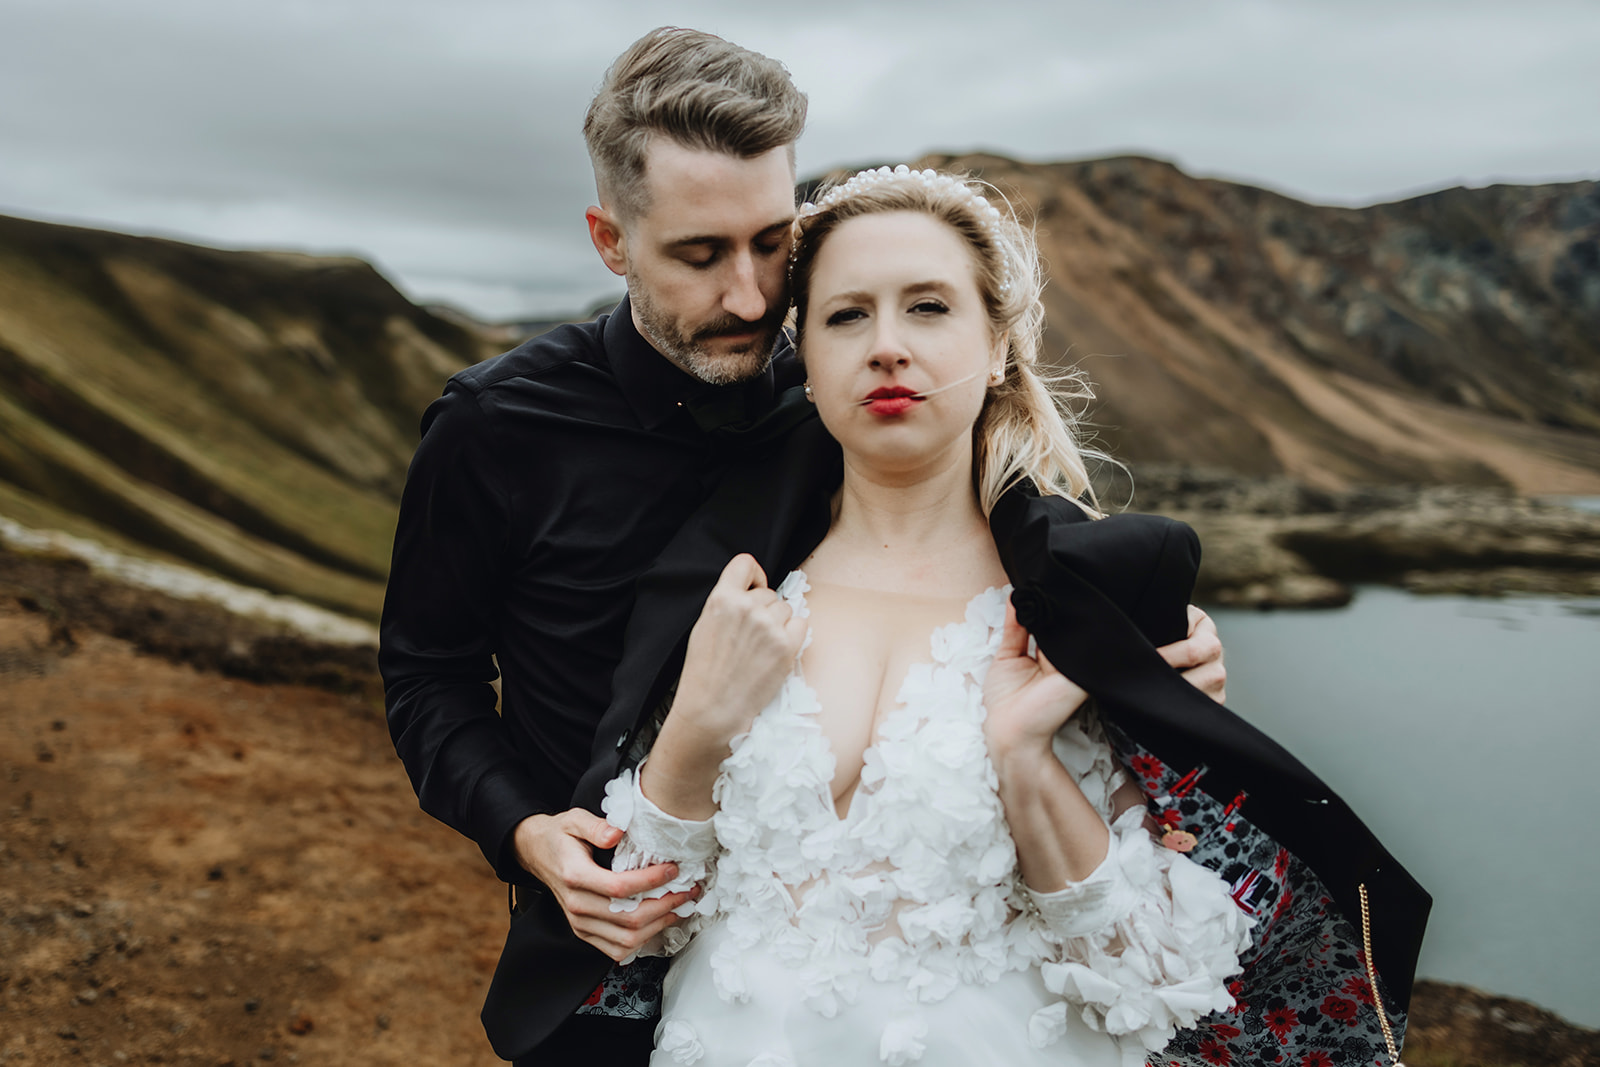 Groom is covering his wife with his wedding jacket from the cold weather in Iceland